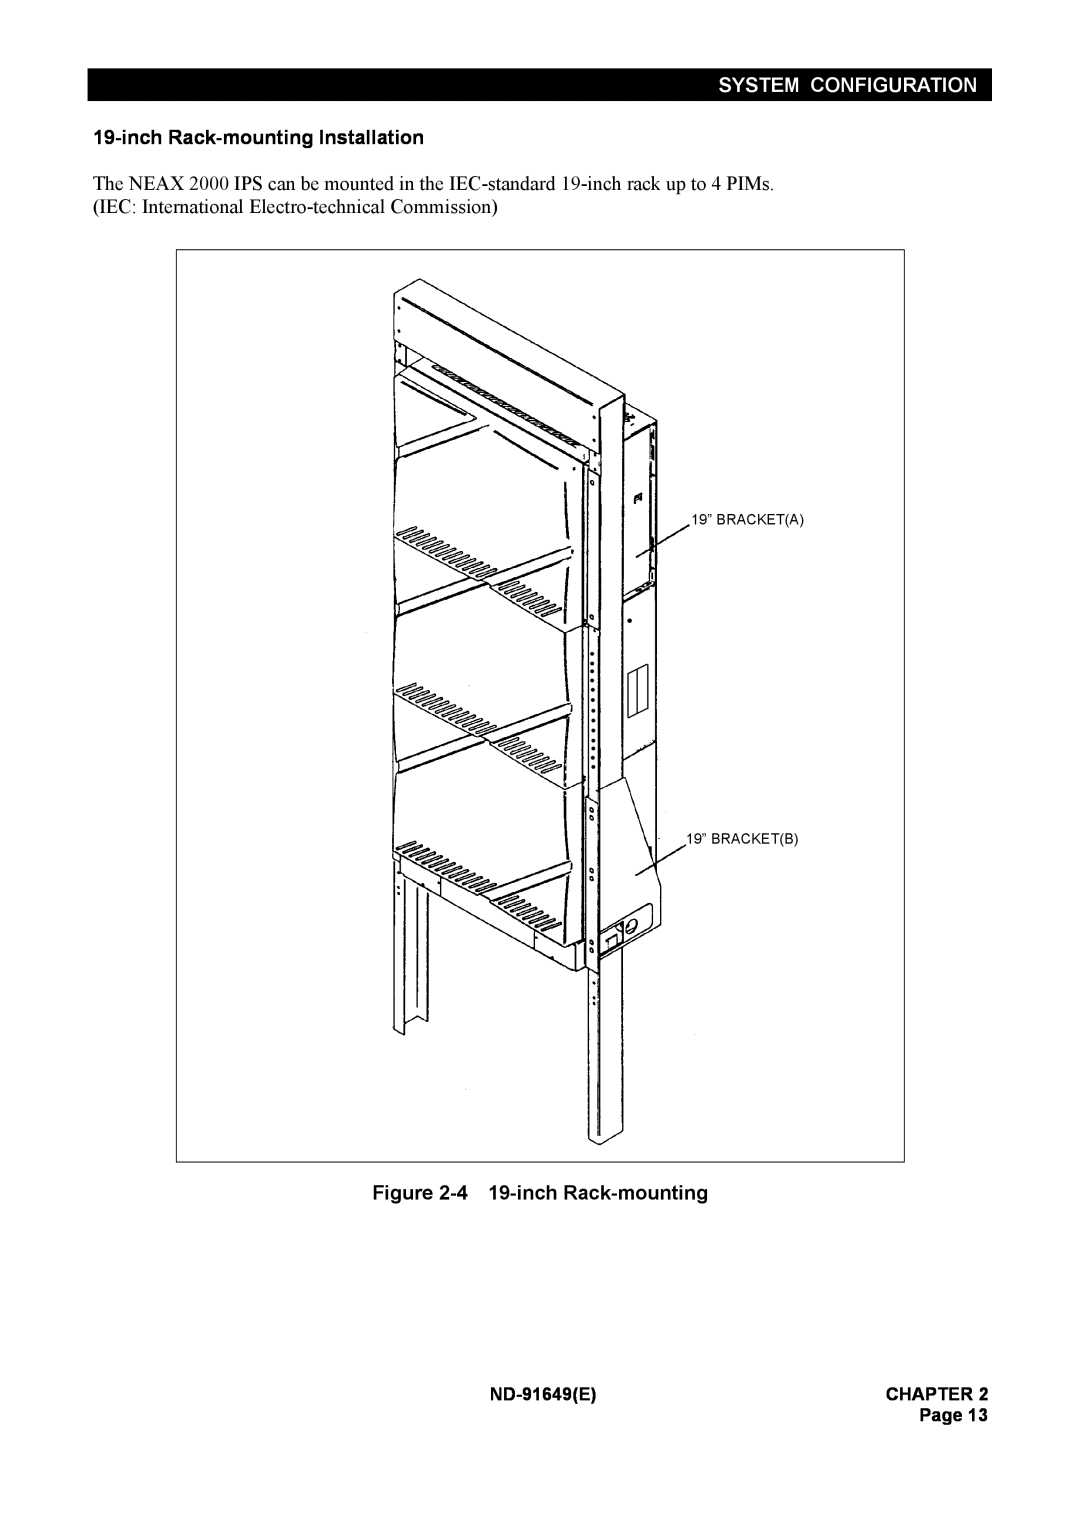 NEC manual System Configuration, inch Rack-mounting Installation, 4 19-inch Rack-mounting, ND-91649E, Chapter, Page 